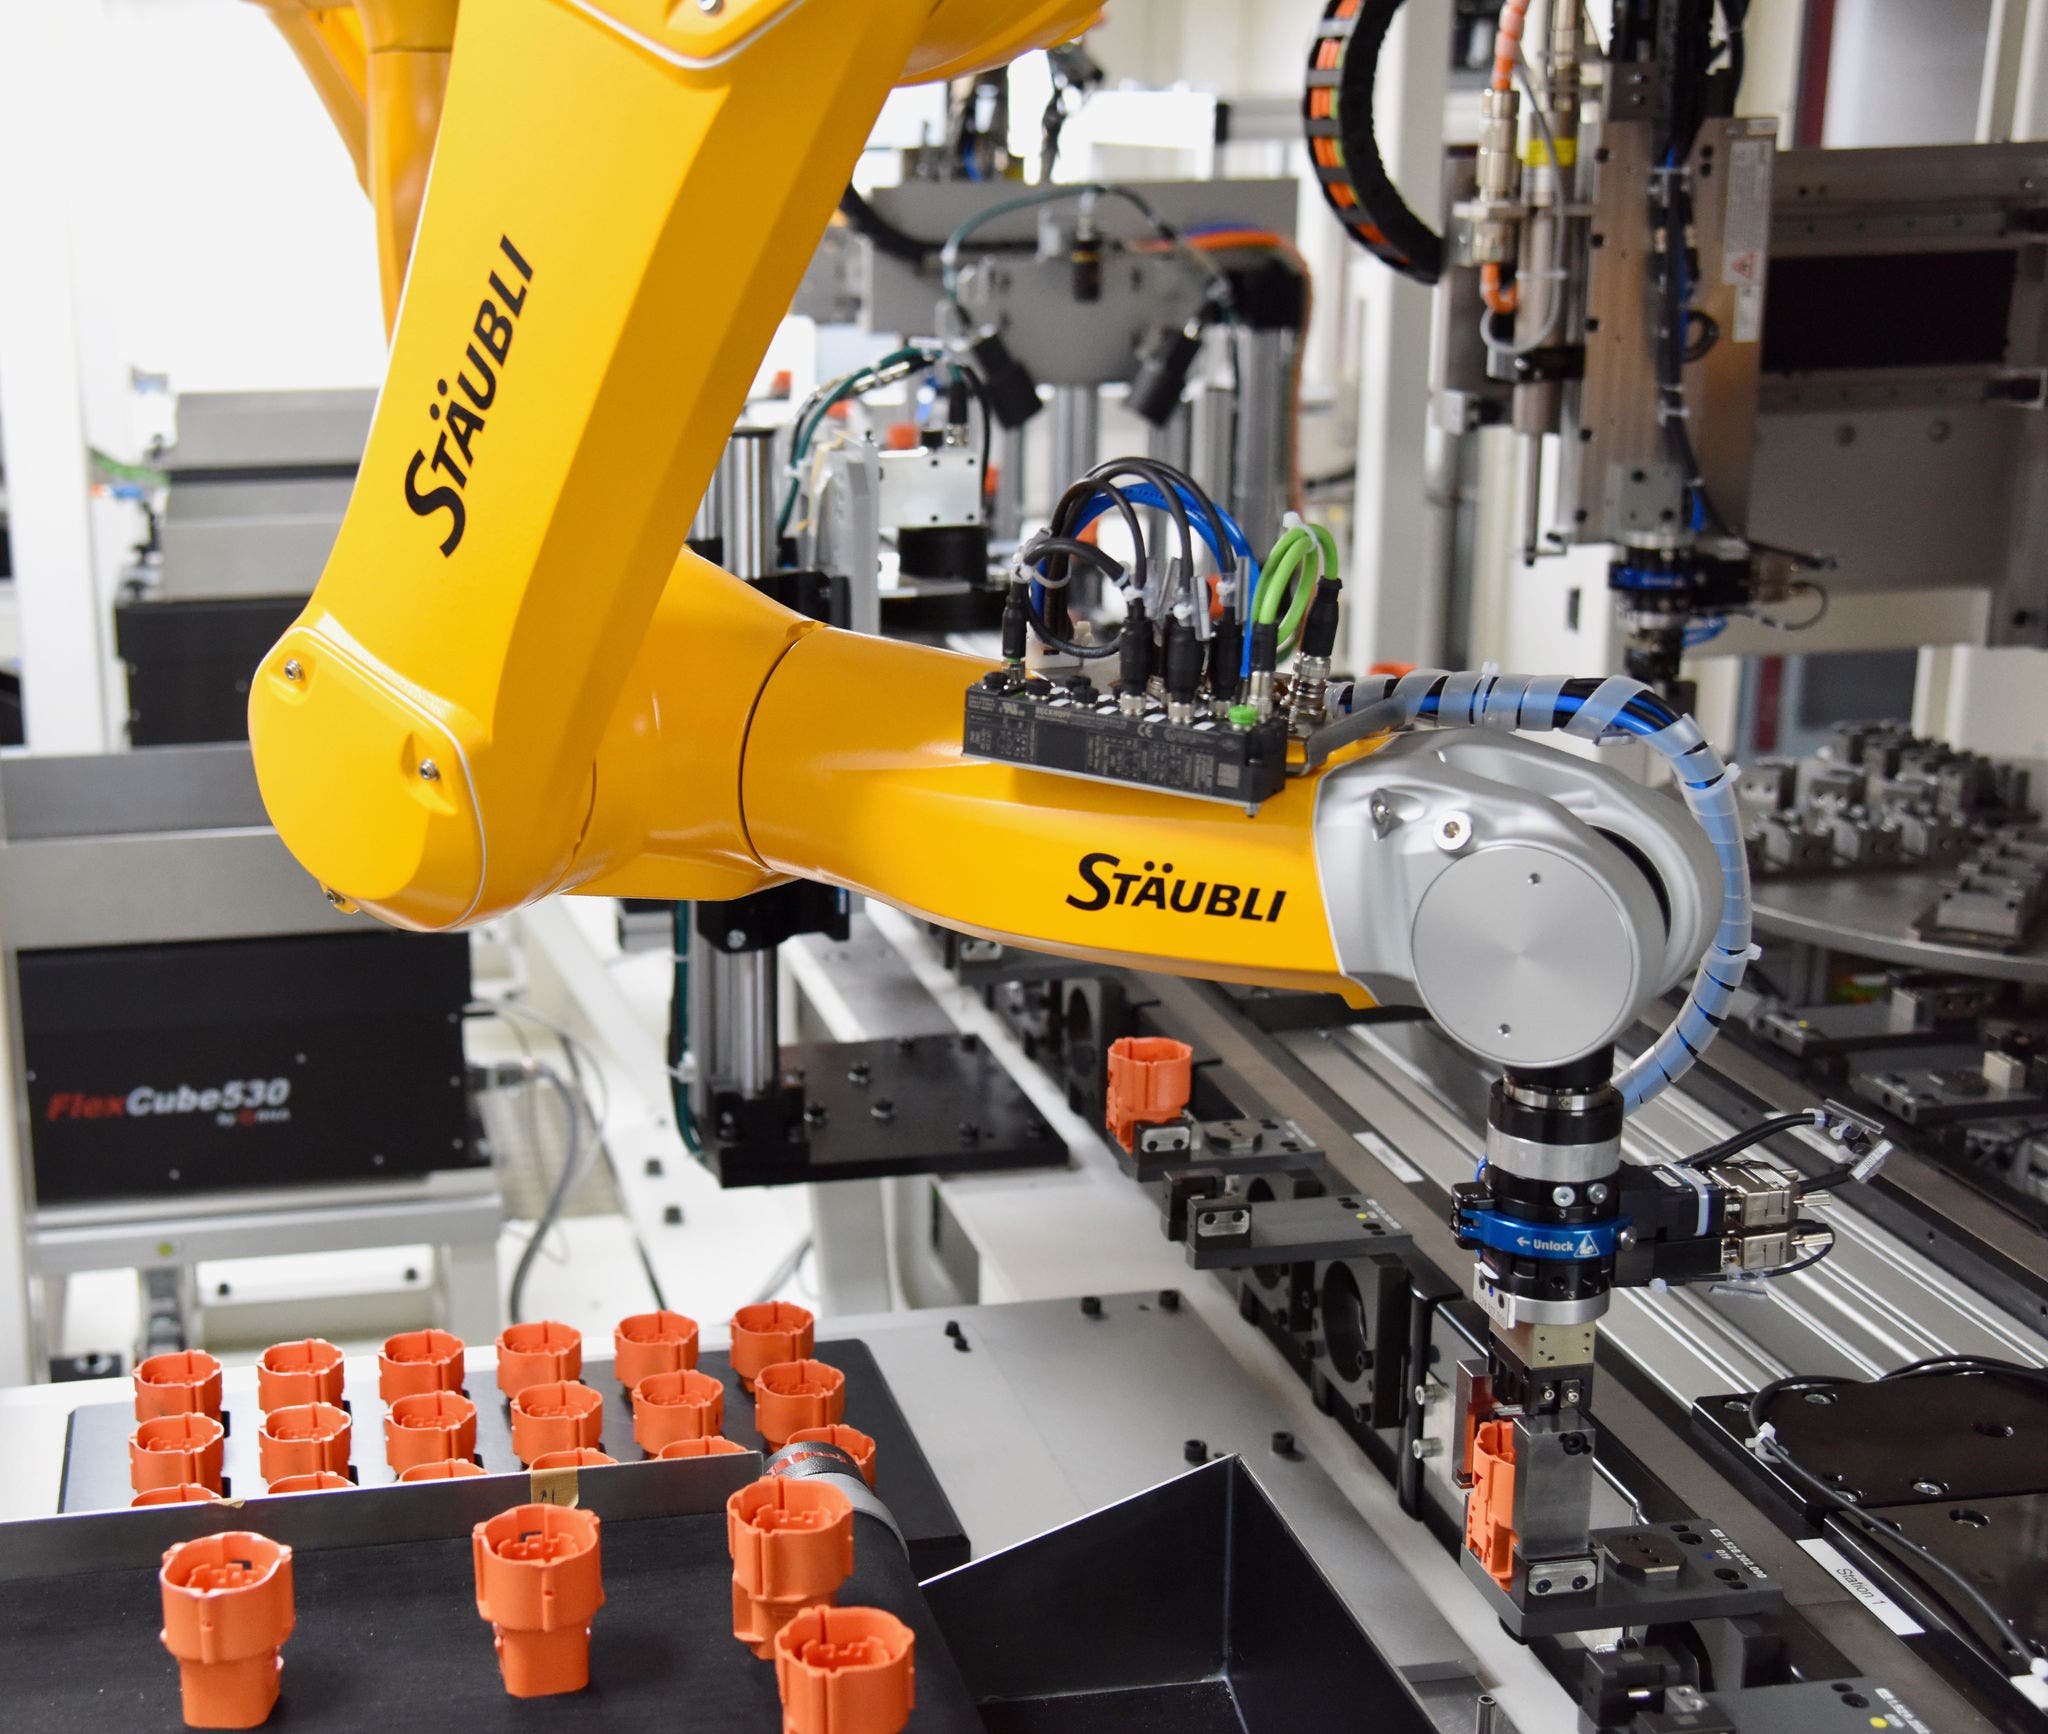 The first of the six installed TX2-60L robots places a connector housing into the workpiece carrier.